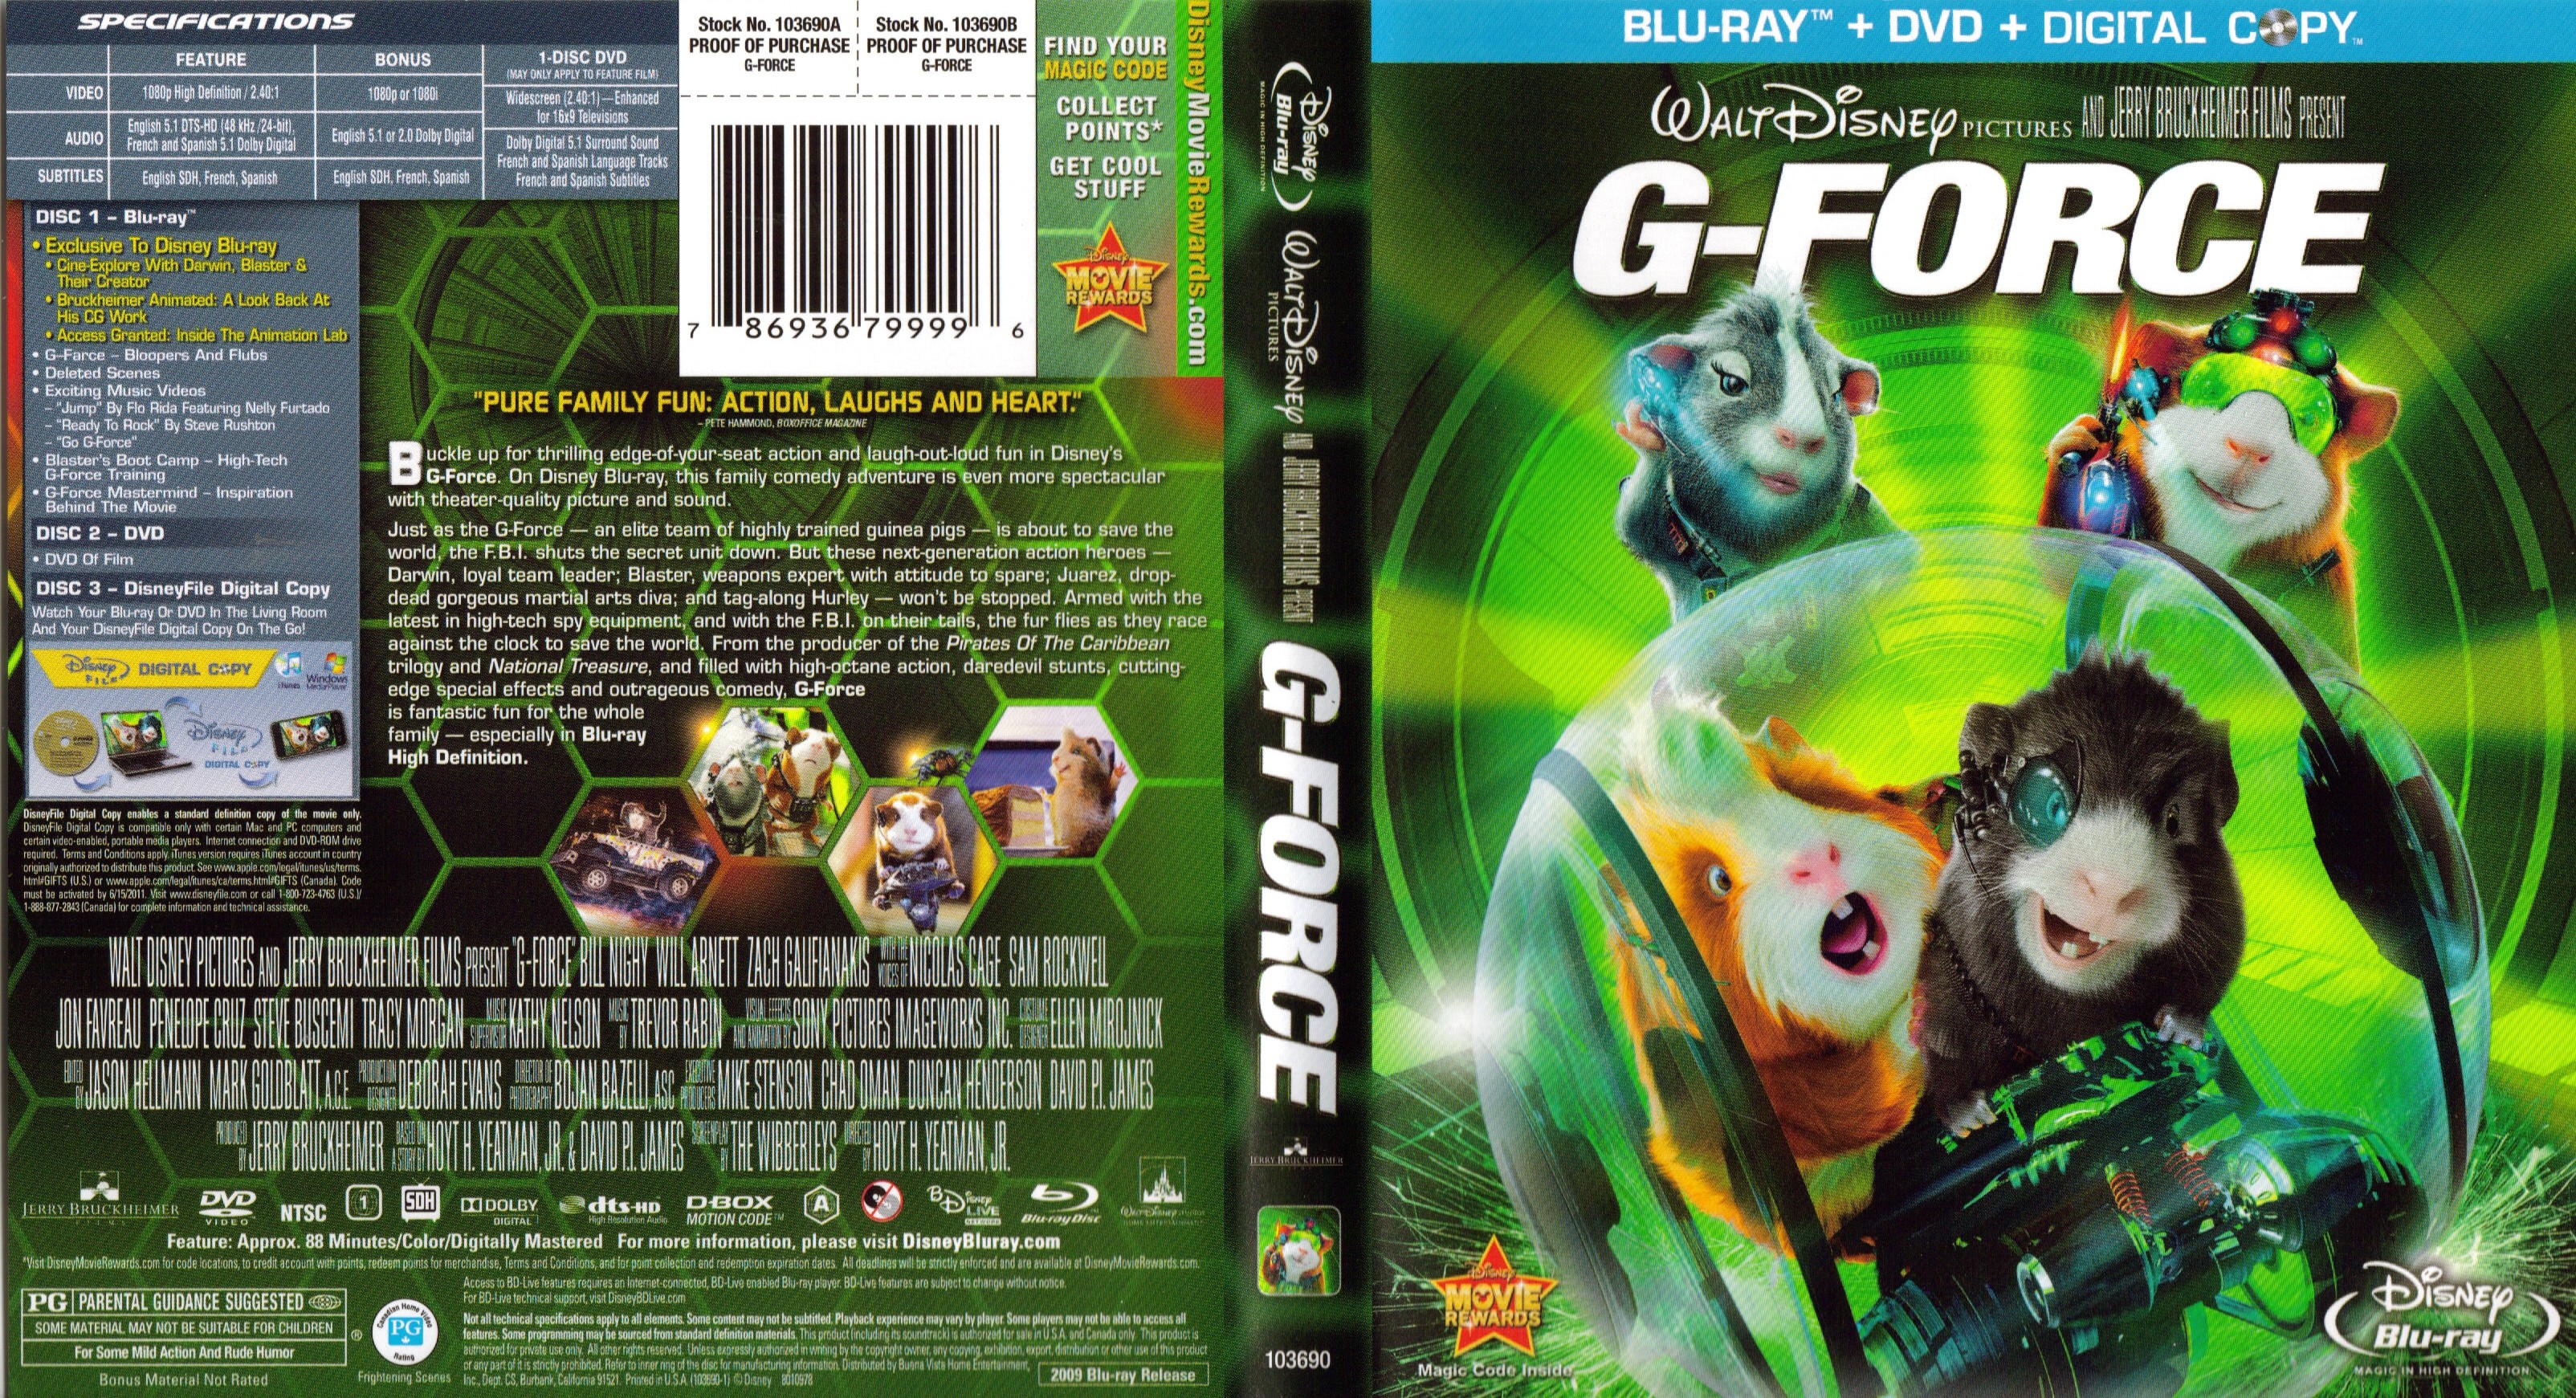 Jaquette DVD G-force (Canadienne) (BLU-RAY)